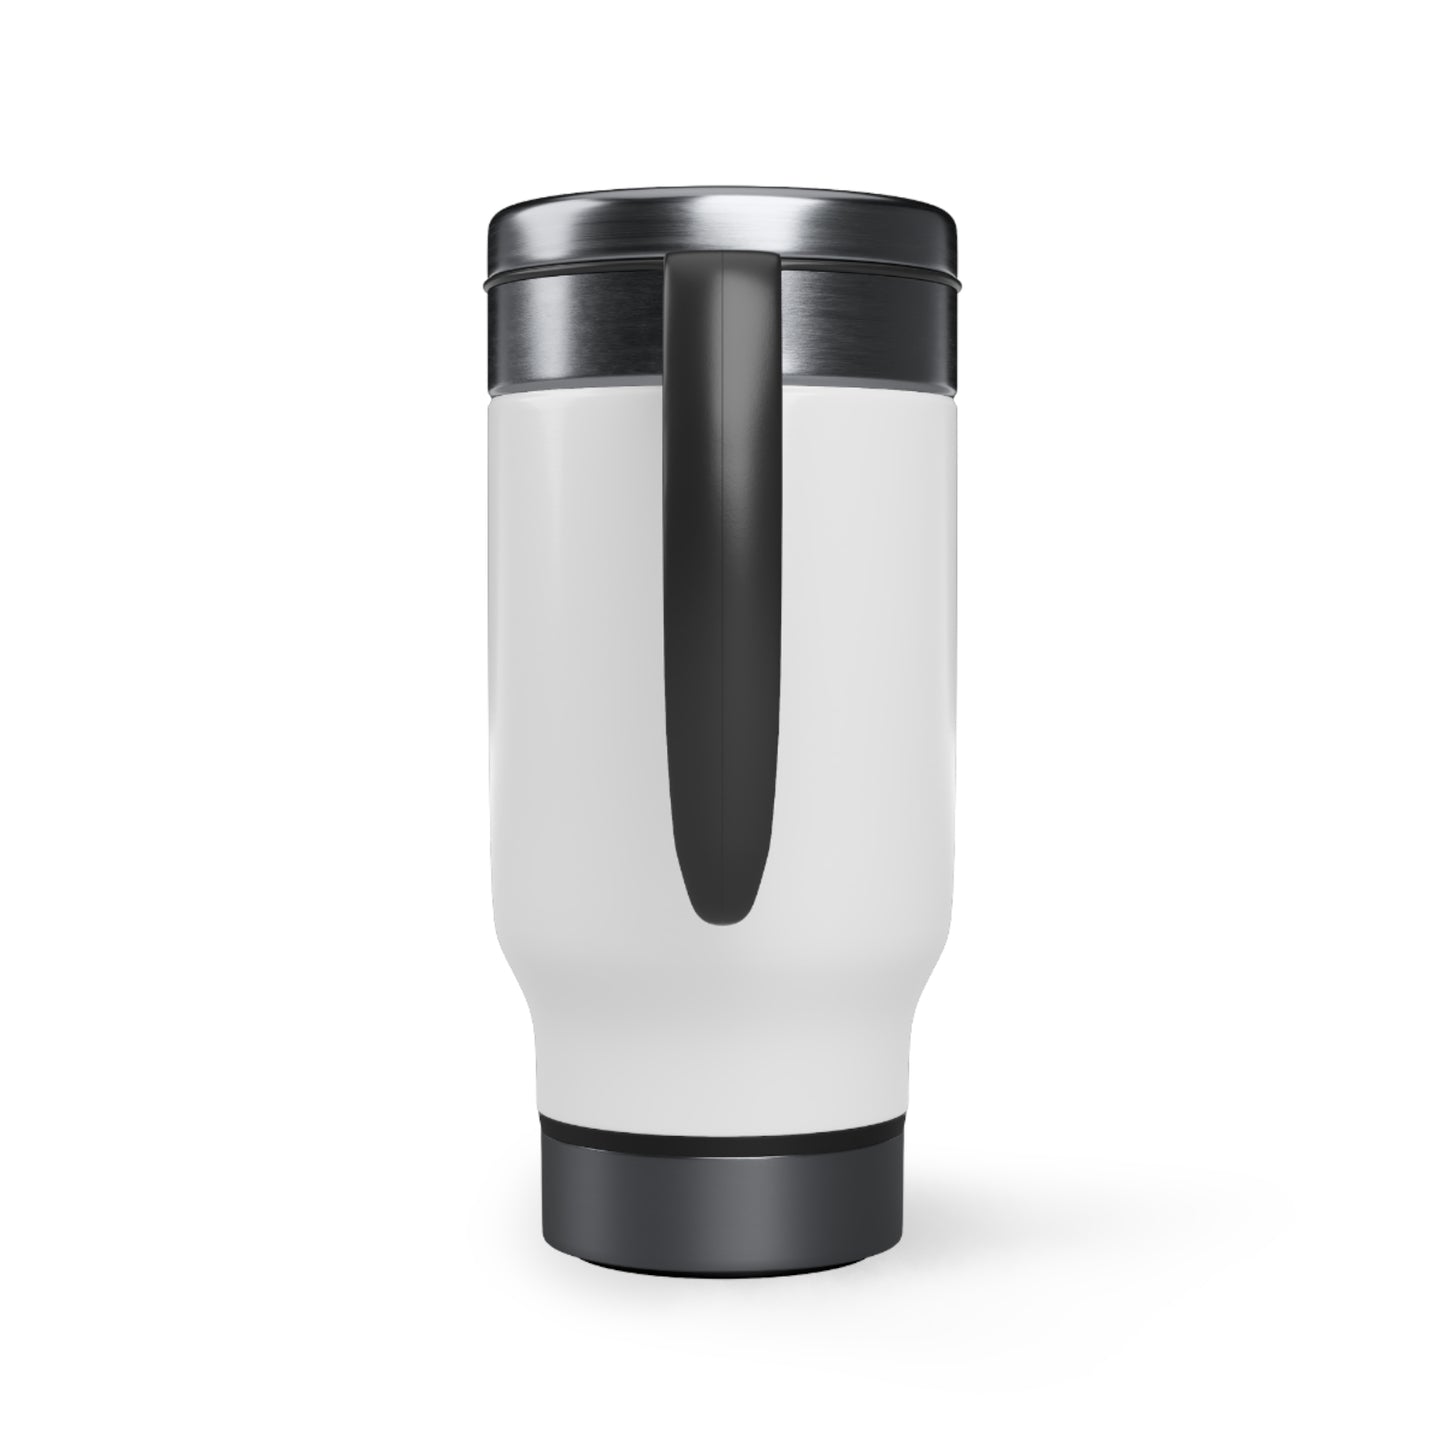 Los Angeles Doyers Stainless Steel Travel Mug with Handle, 14oz